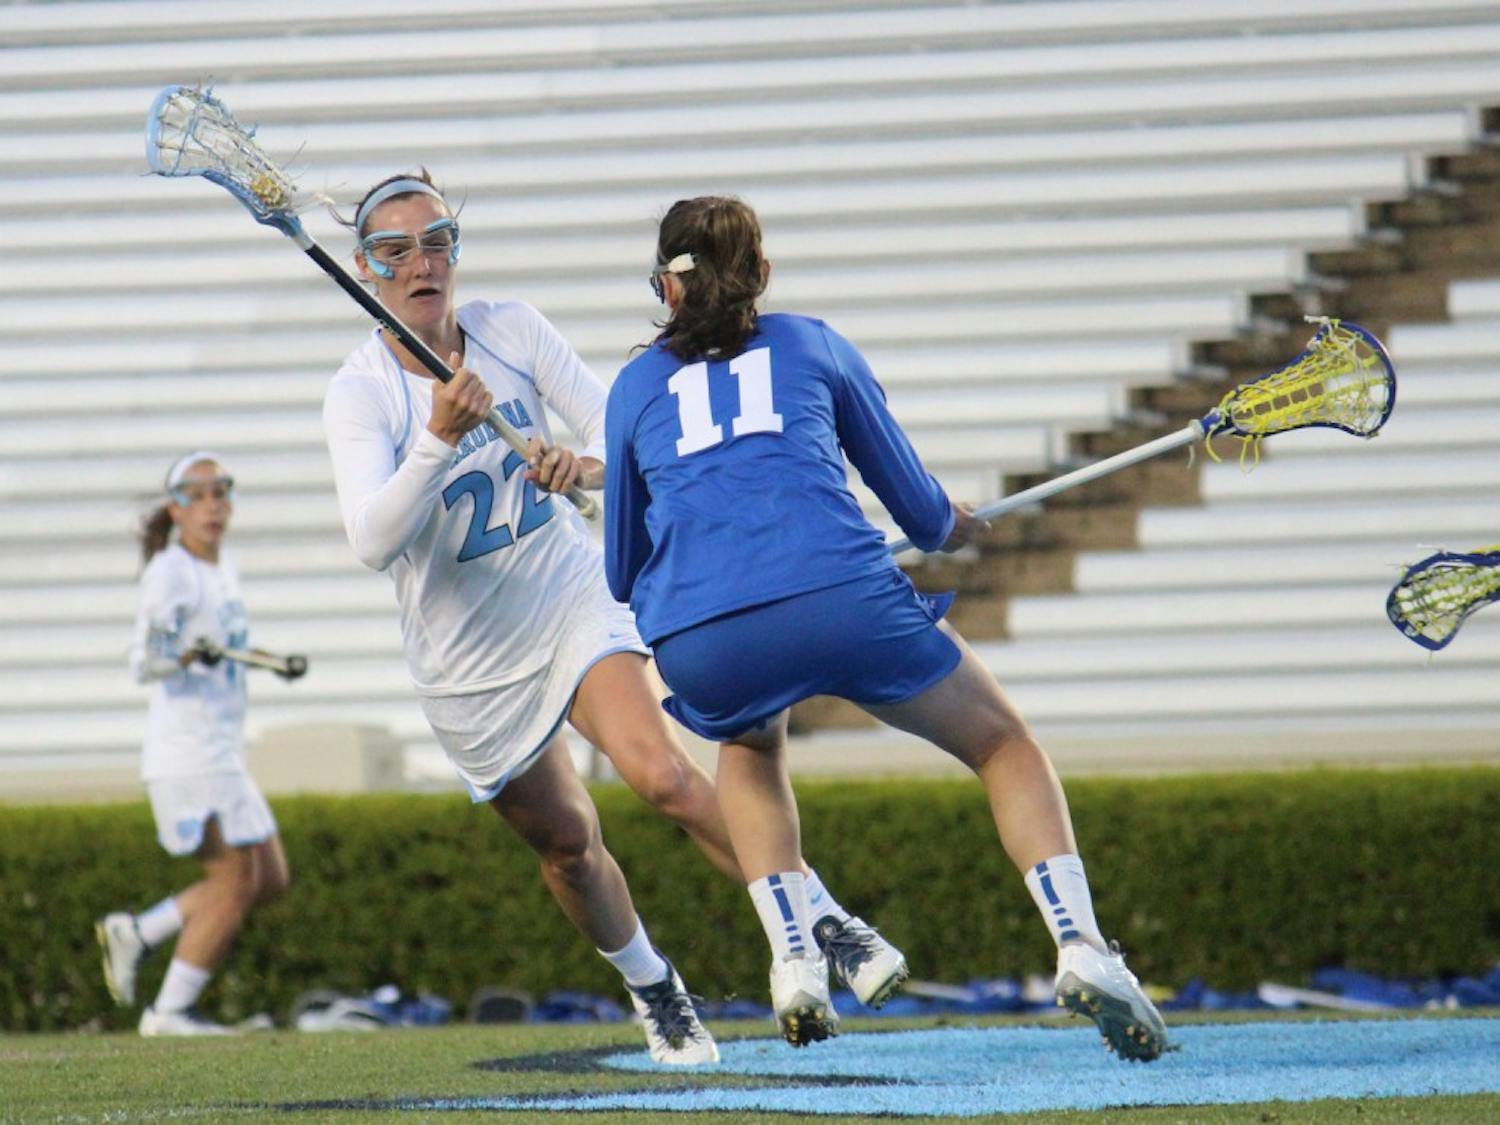 Women's lacrosse suffers a loss 7-6 to Duke in overtime on Wednesday in Kenan Stadium. Number 22 midfielder Maggie Bill dodges a Duke player during the first half. 